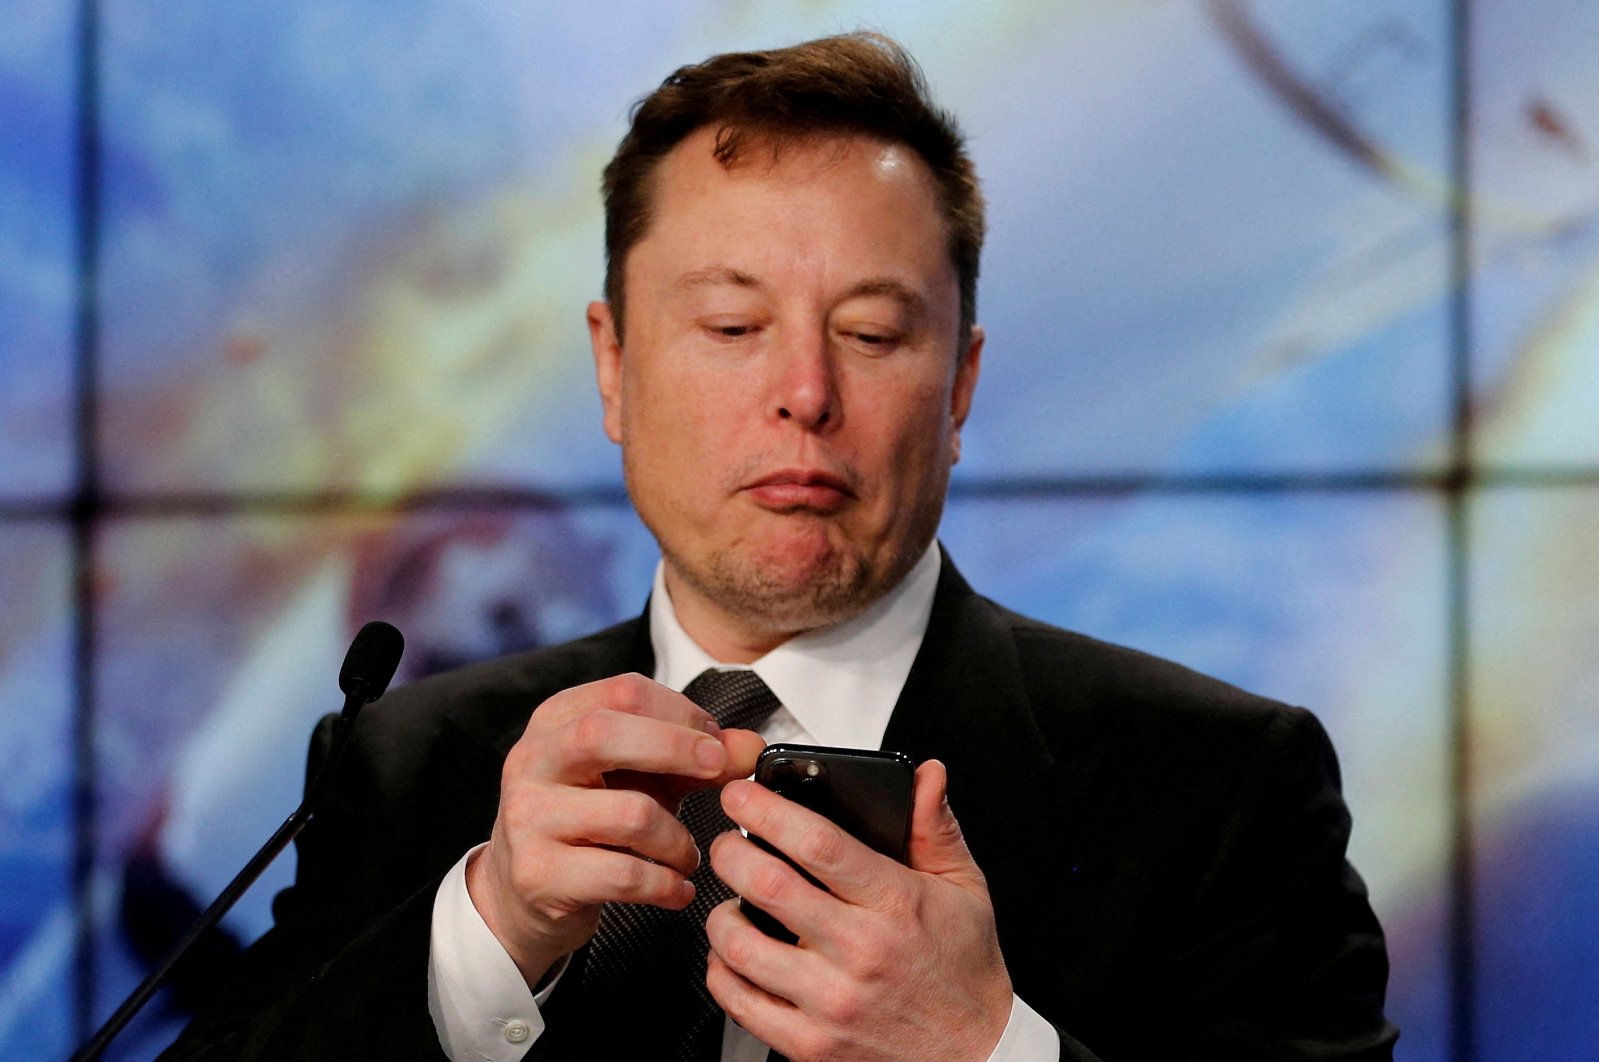 Elon Musk looks at his mobile phone in Cape Canaveral, Florida, U.S. Jan. 19, 2020. (Reuters Photo)